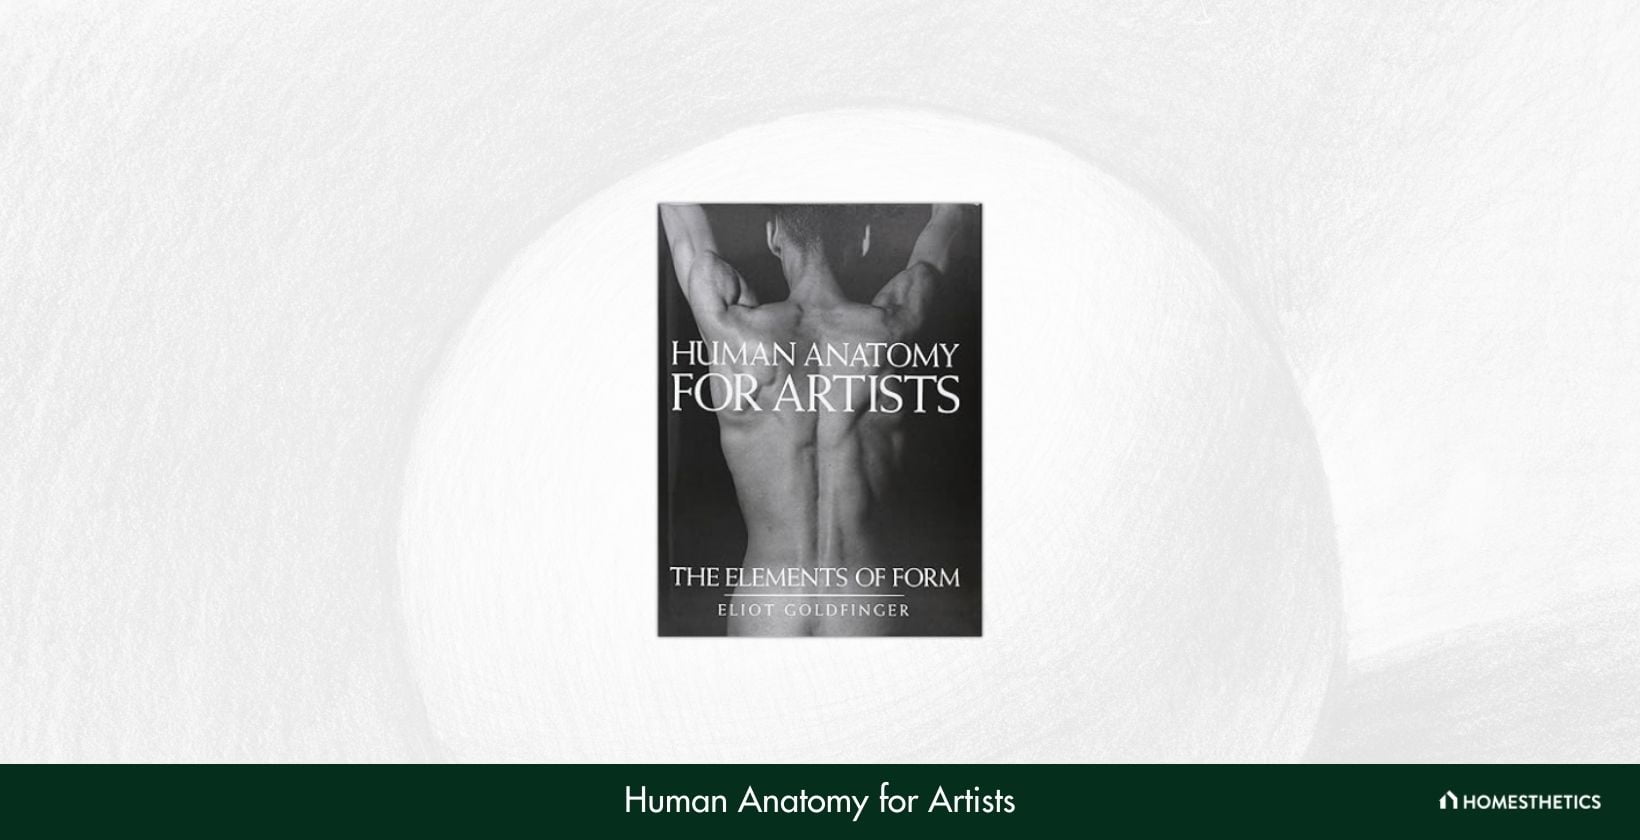 Human Anatomy for Artists The Elements of Form by Eliot Goldfinger